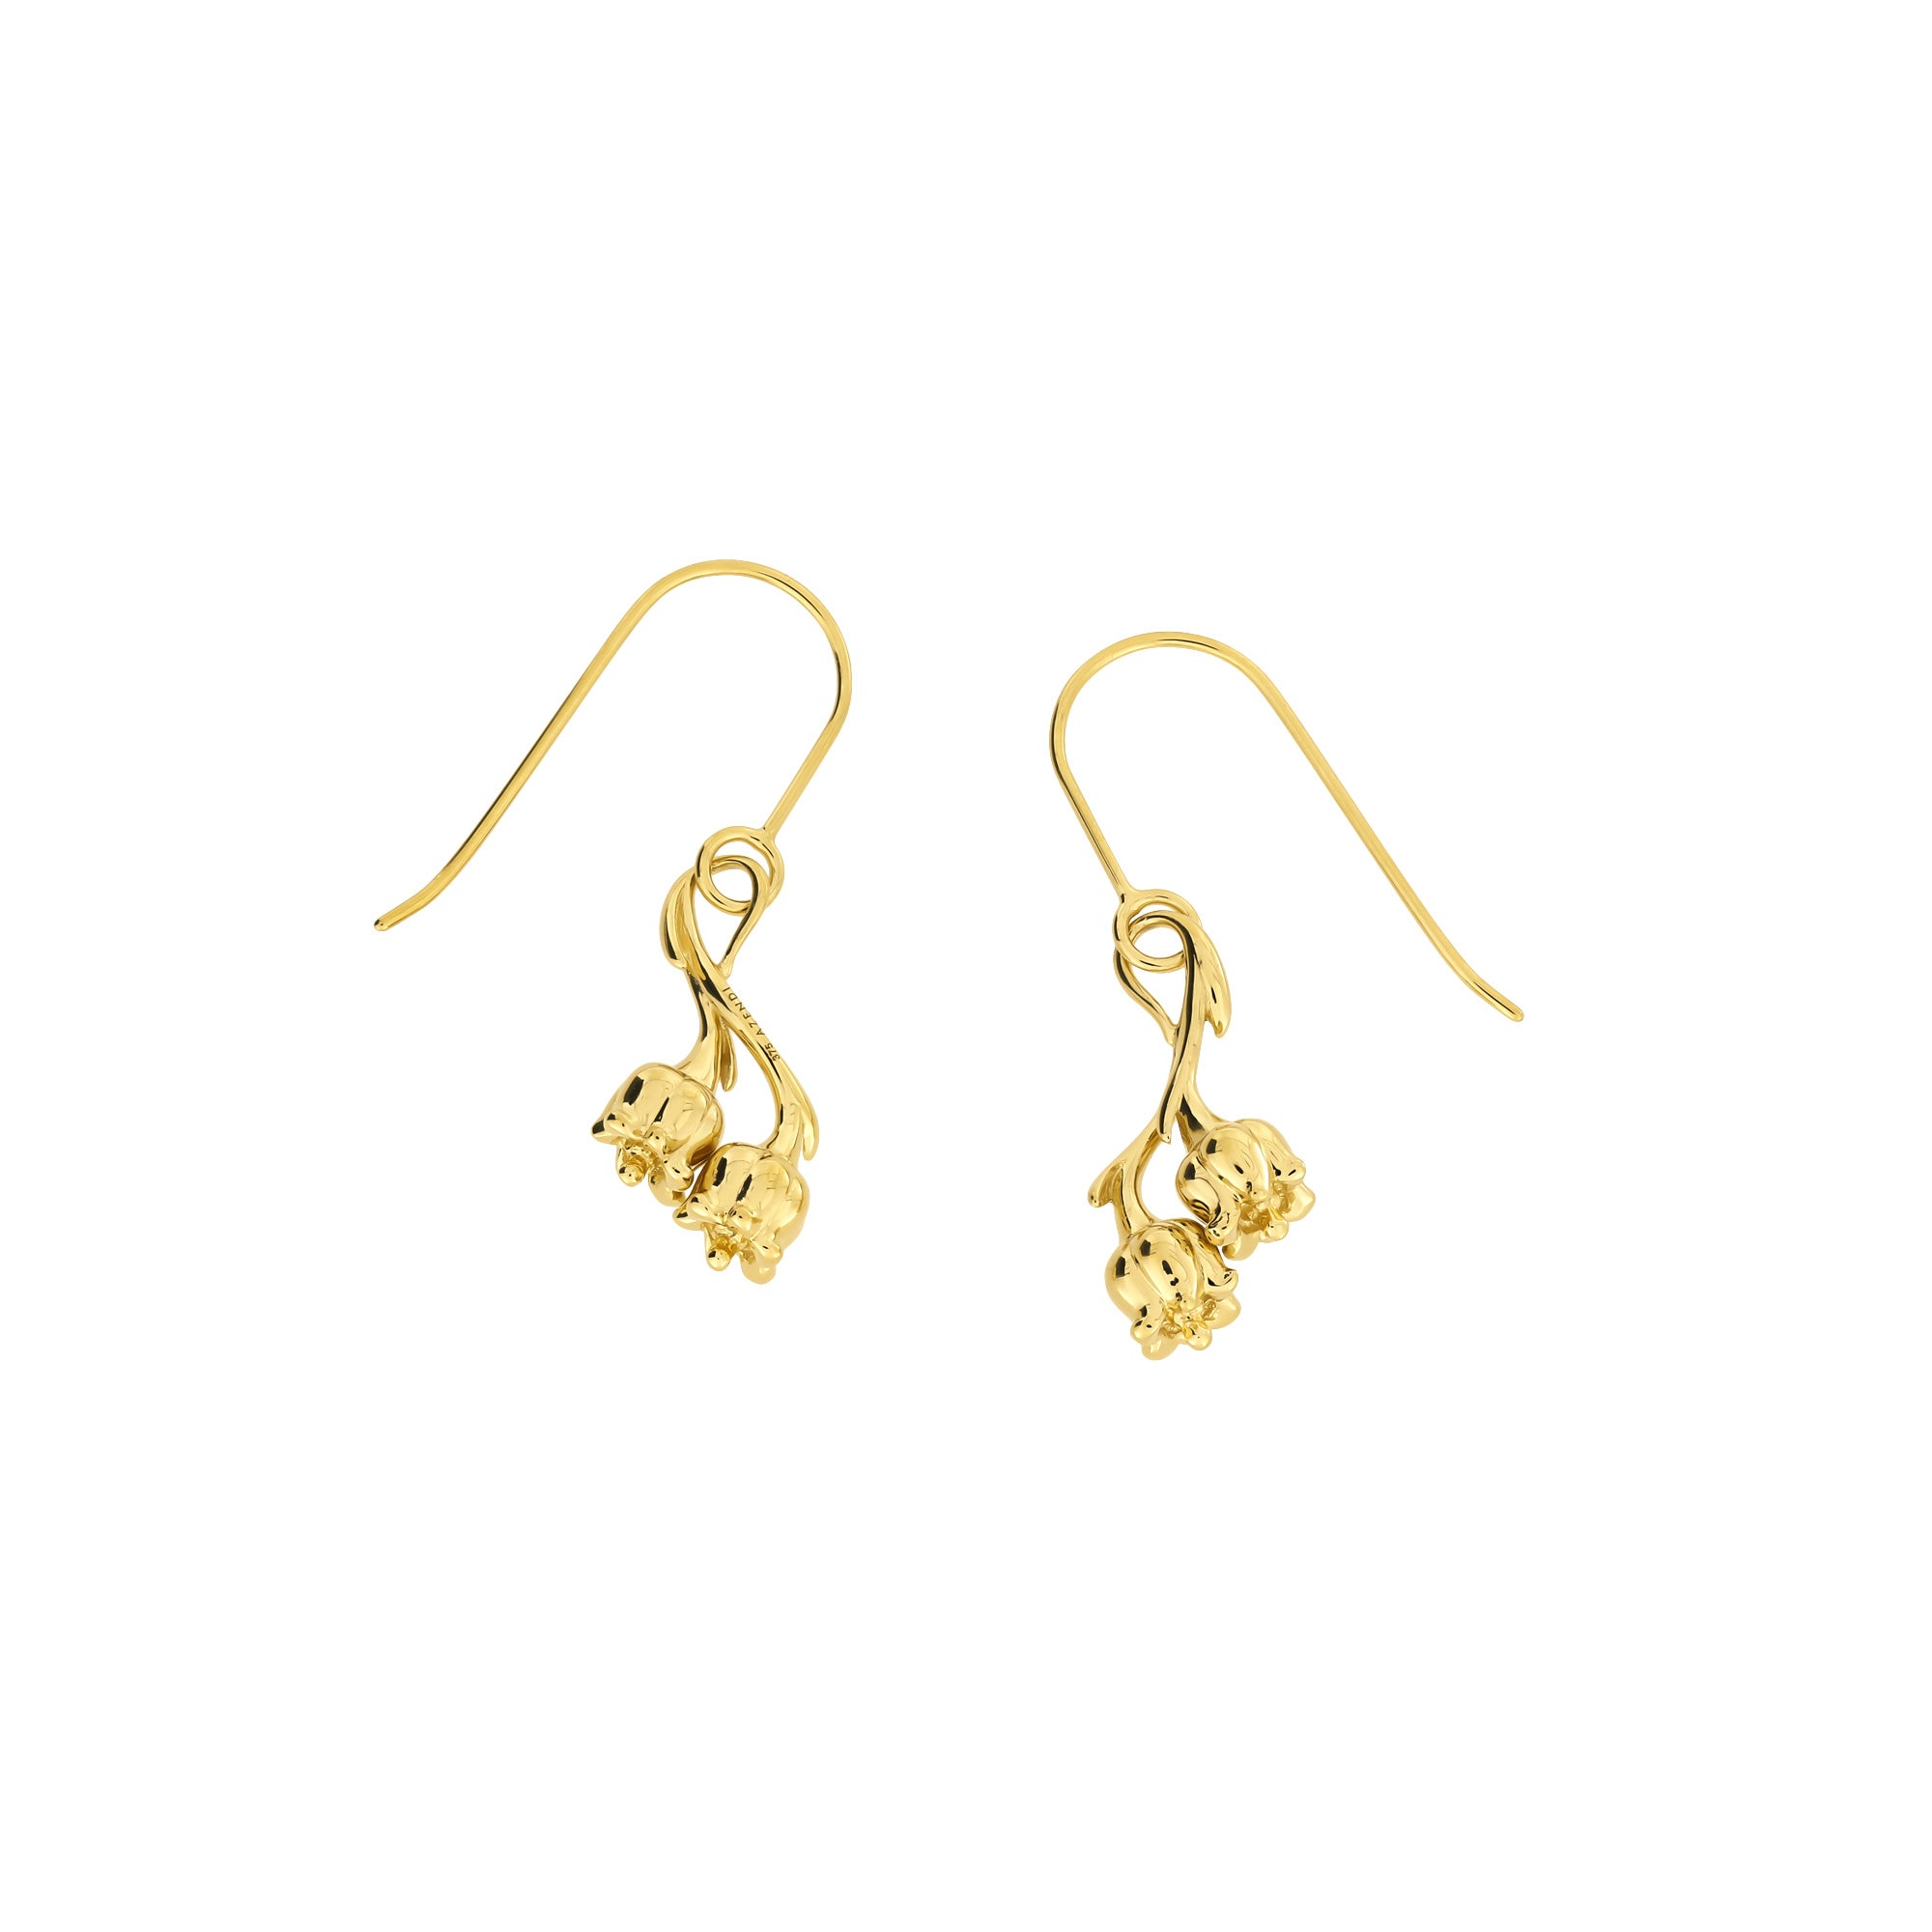 May - 9 Carat Gold Lily of the Valley Earrings